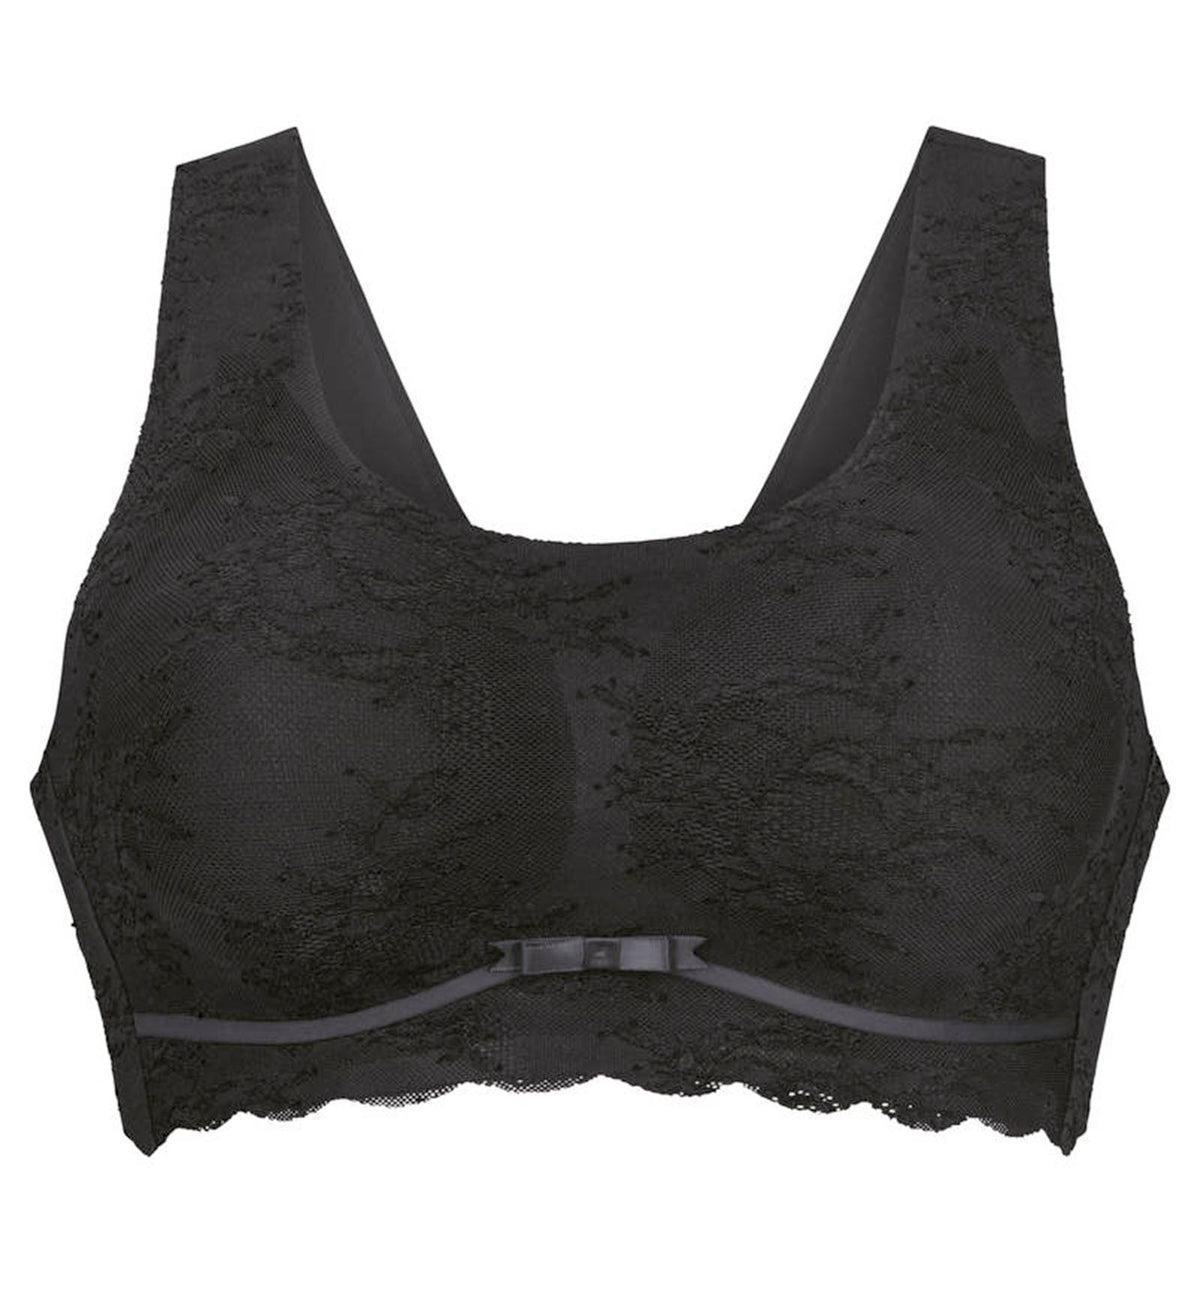 Anita Essentials Lace Lightly Padded Bralette (5400),Small,Anthracite - Anthracite,Small